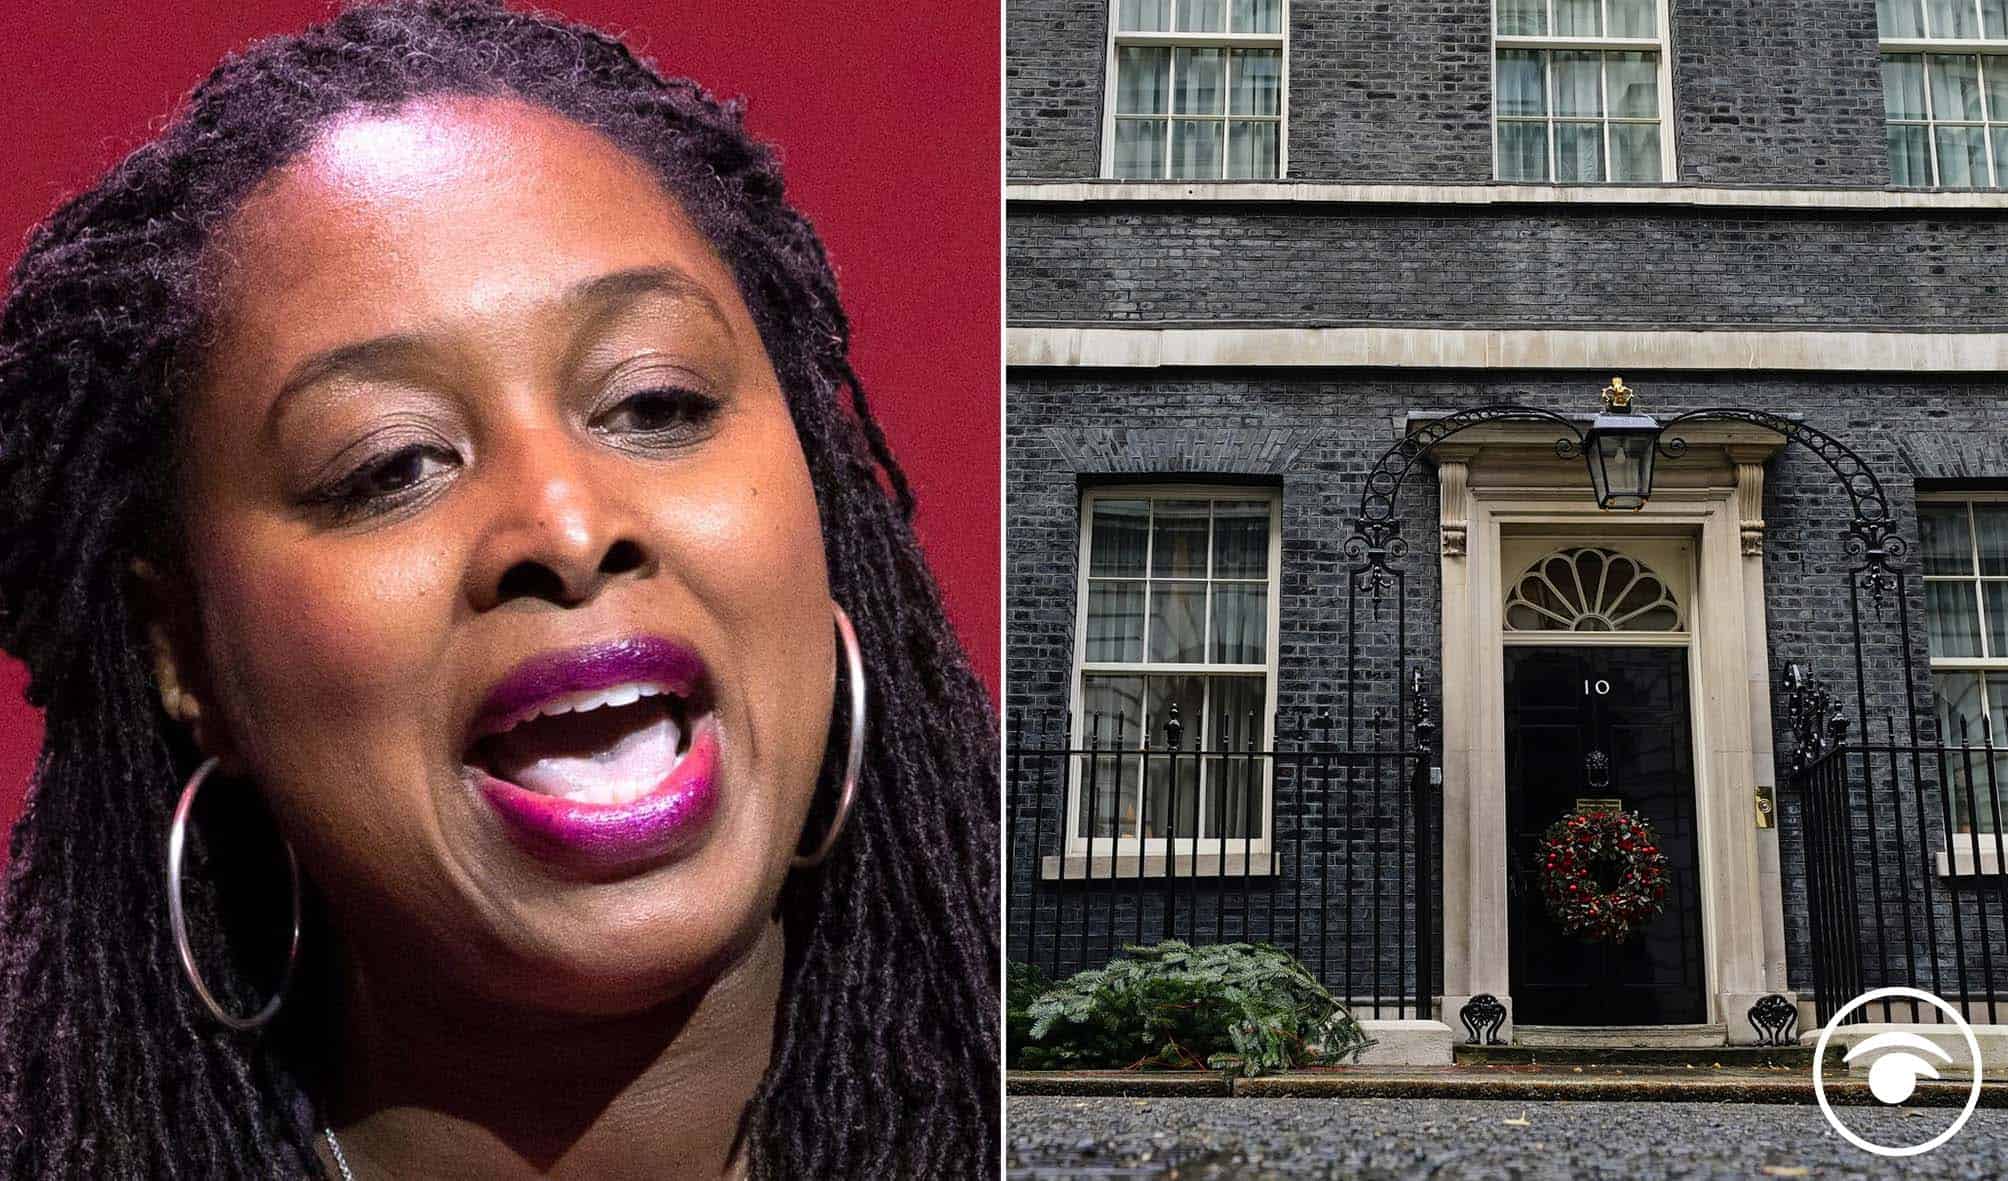 Watch: Dawn Butler forced to explain to Tory MP why telling truth in parliament is important